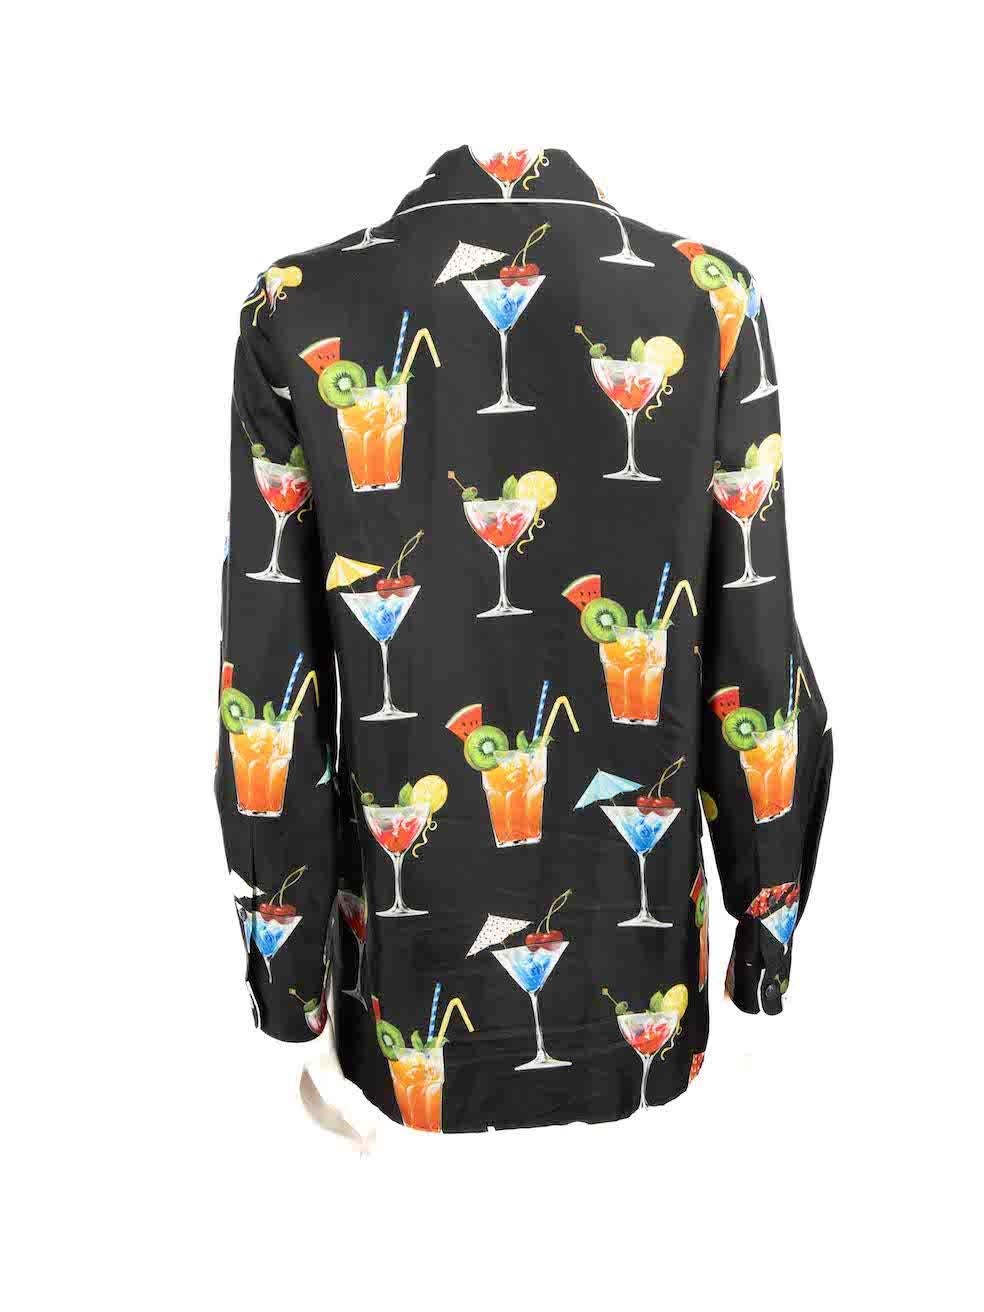 Dolce & Gabbana Cocktail Print Silk Pyjama Shirt Size S In New Condition For Sale In London, GB